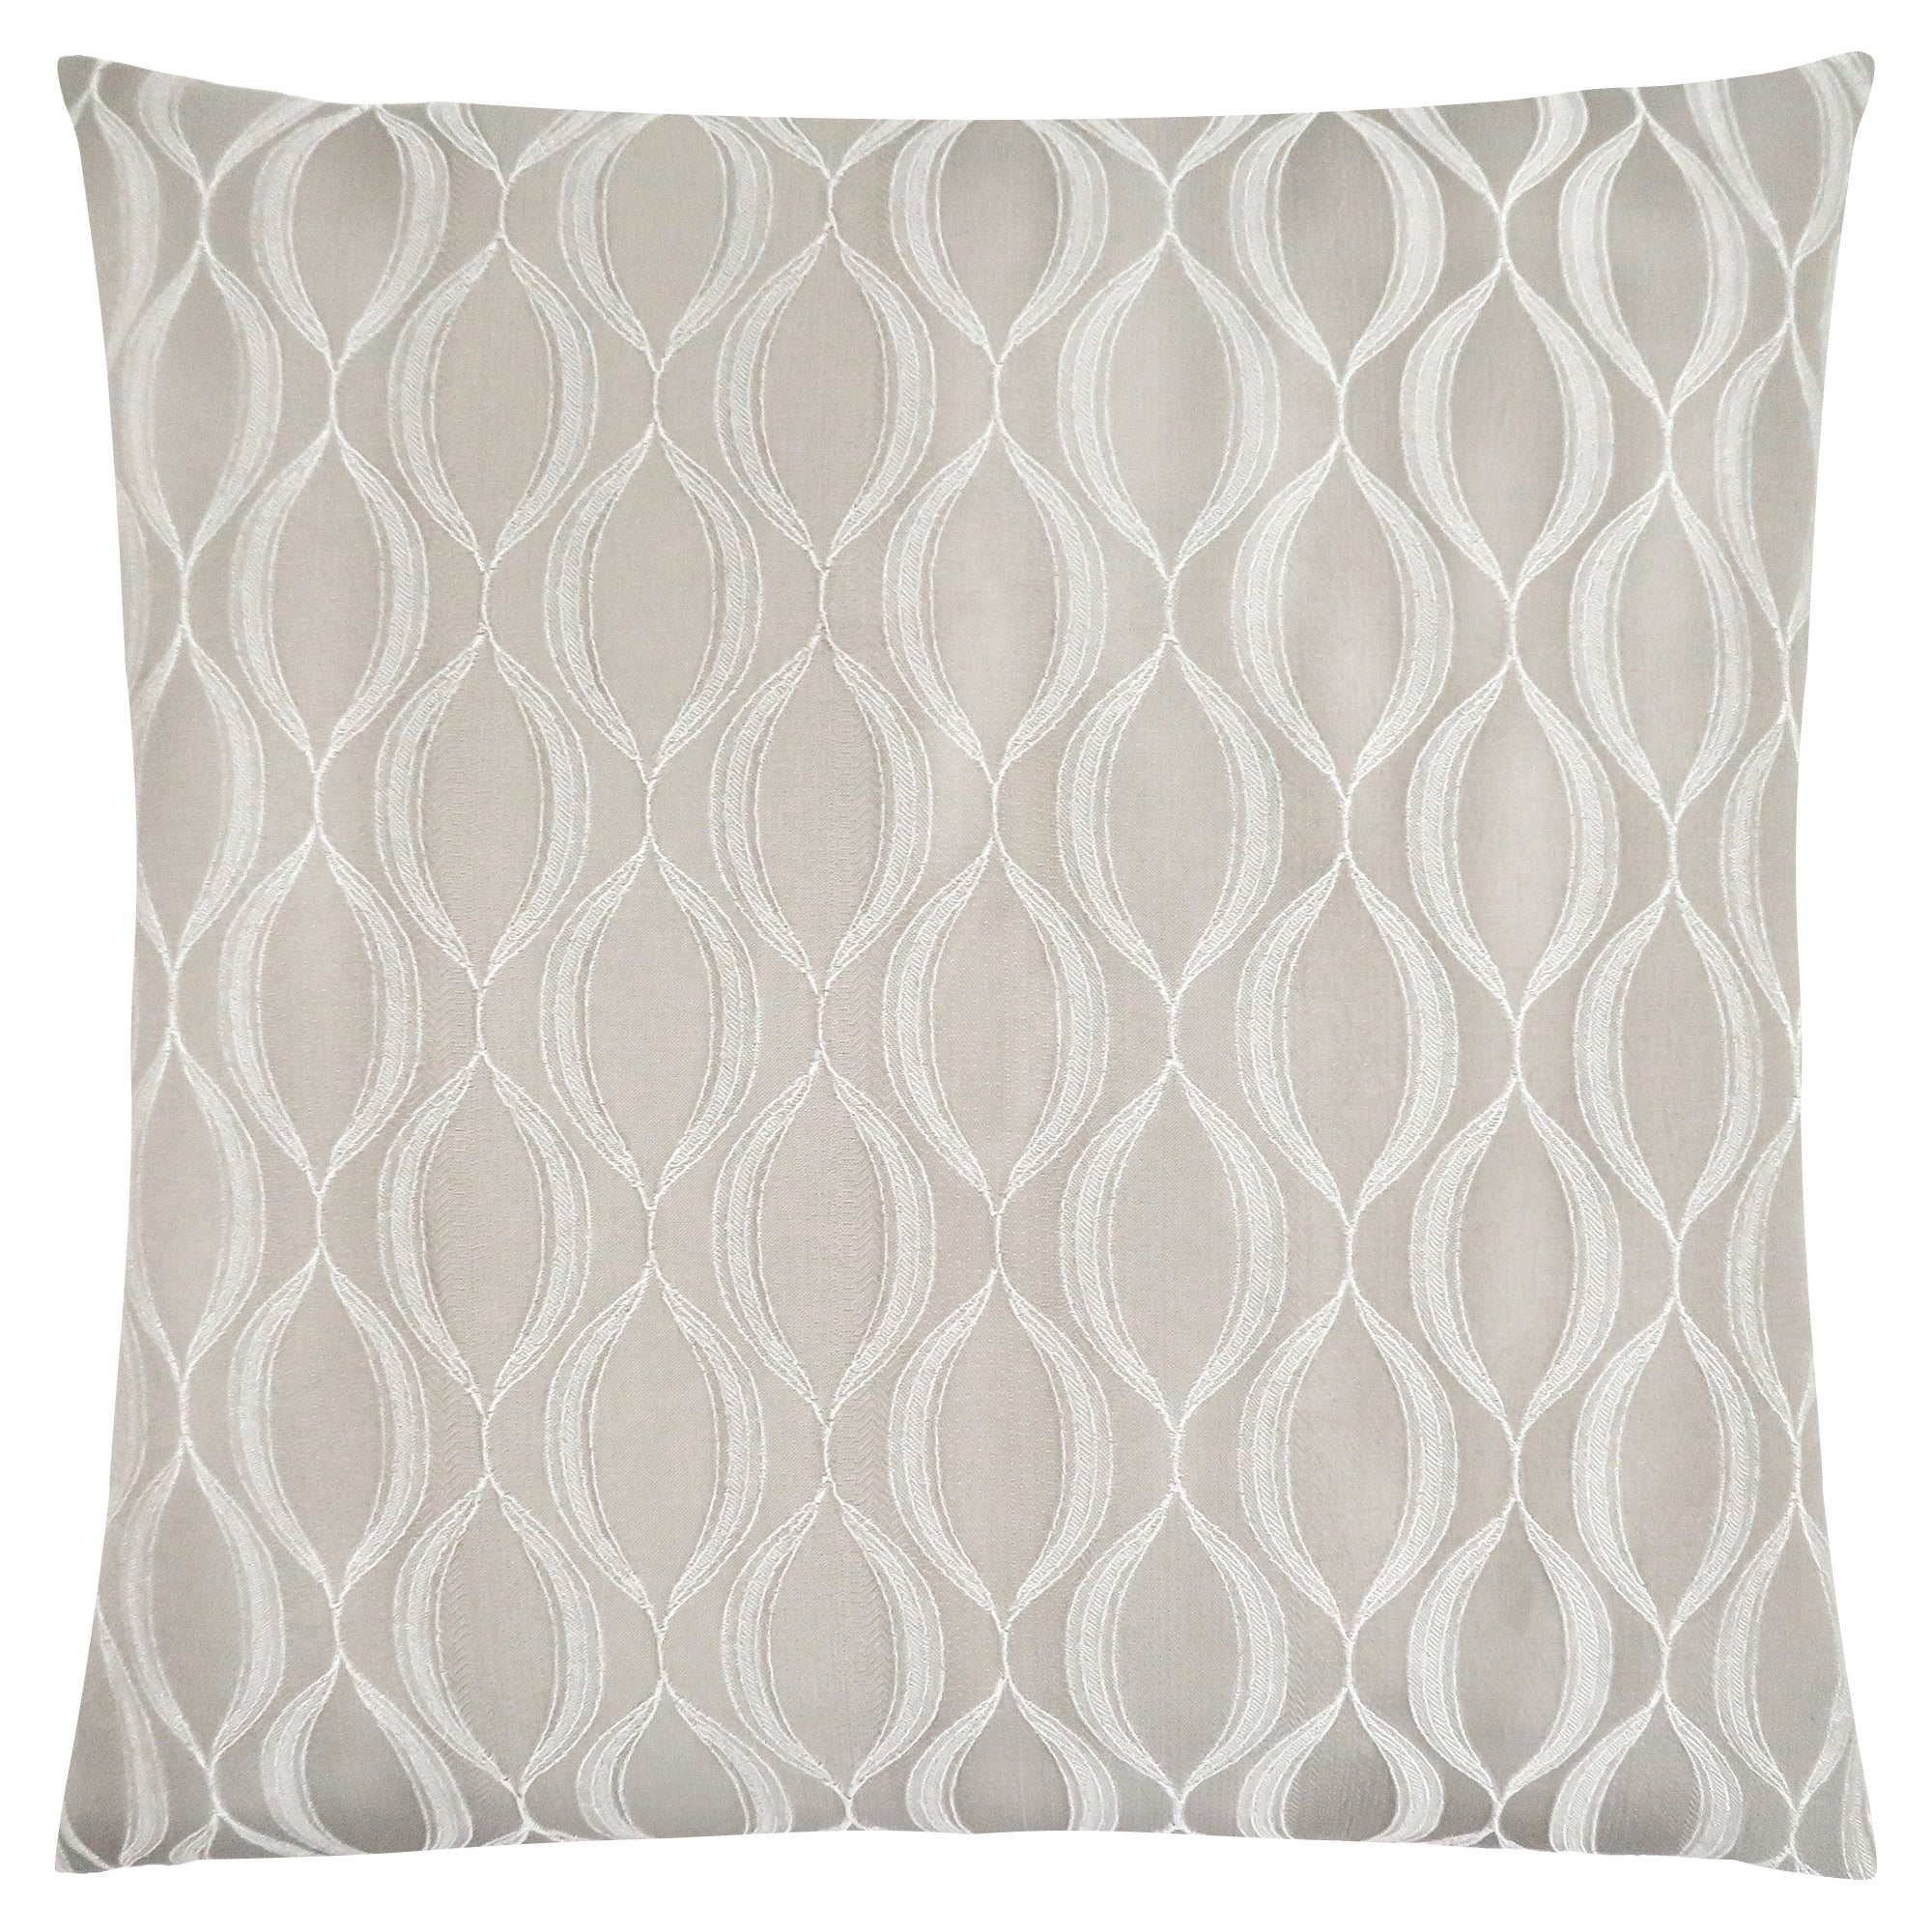 MN-869344    Pillows, 18 X 18 Square, Insert Included, Decorative Throw, Accent, Sofa, Couch, Bed, Soft Polyester Fabric, Hypoallergenic Soft Polyester Insert, Taupe, Classic